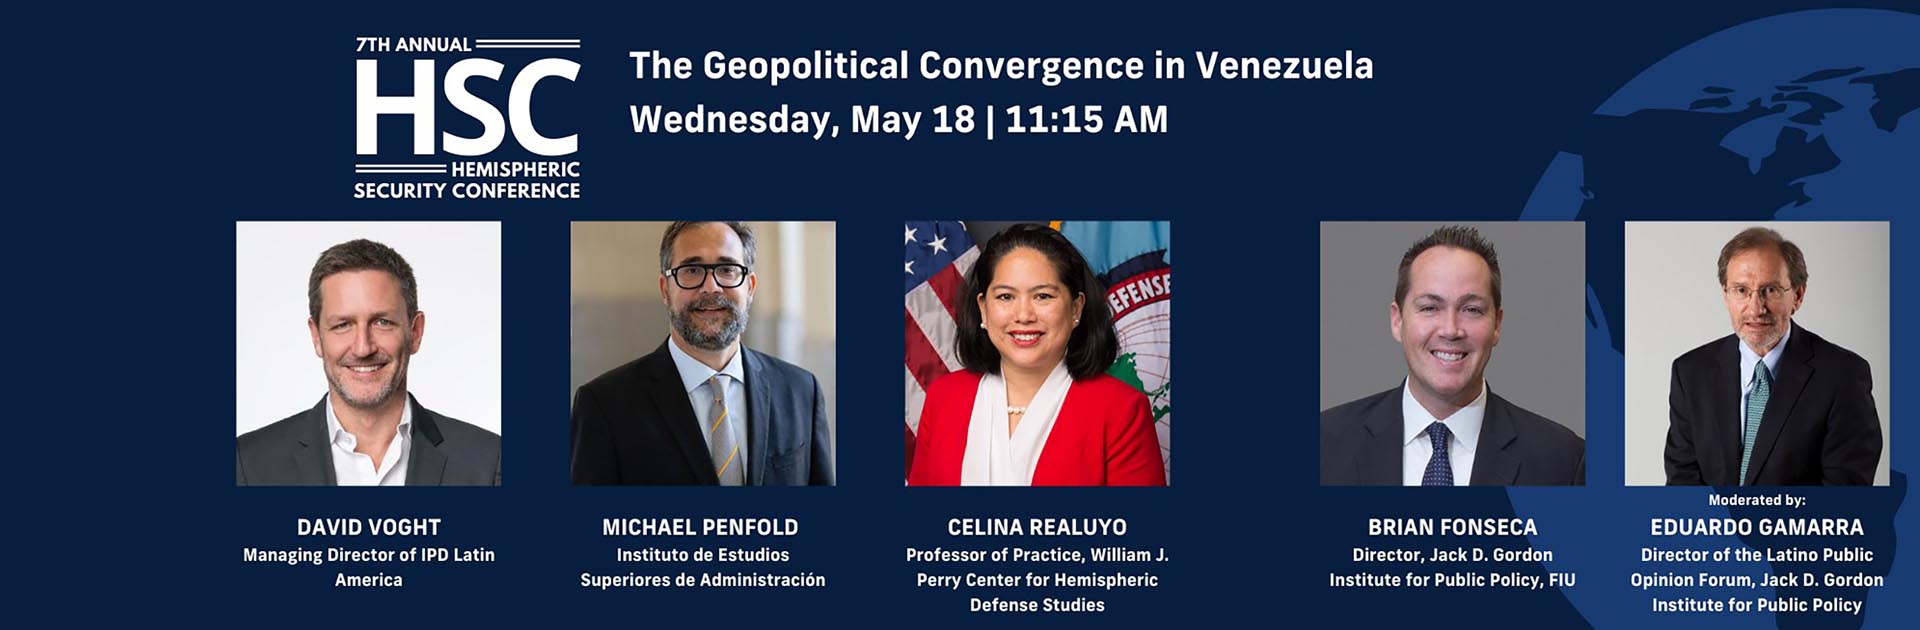 The Geopolitical Convergence in Venezuela" at Hemispheric Security Conference